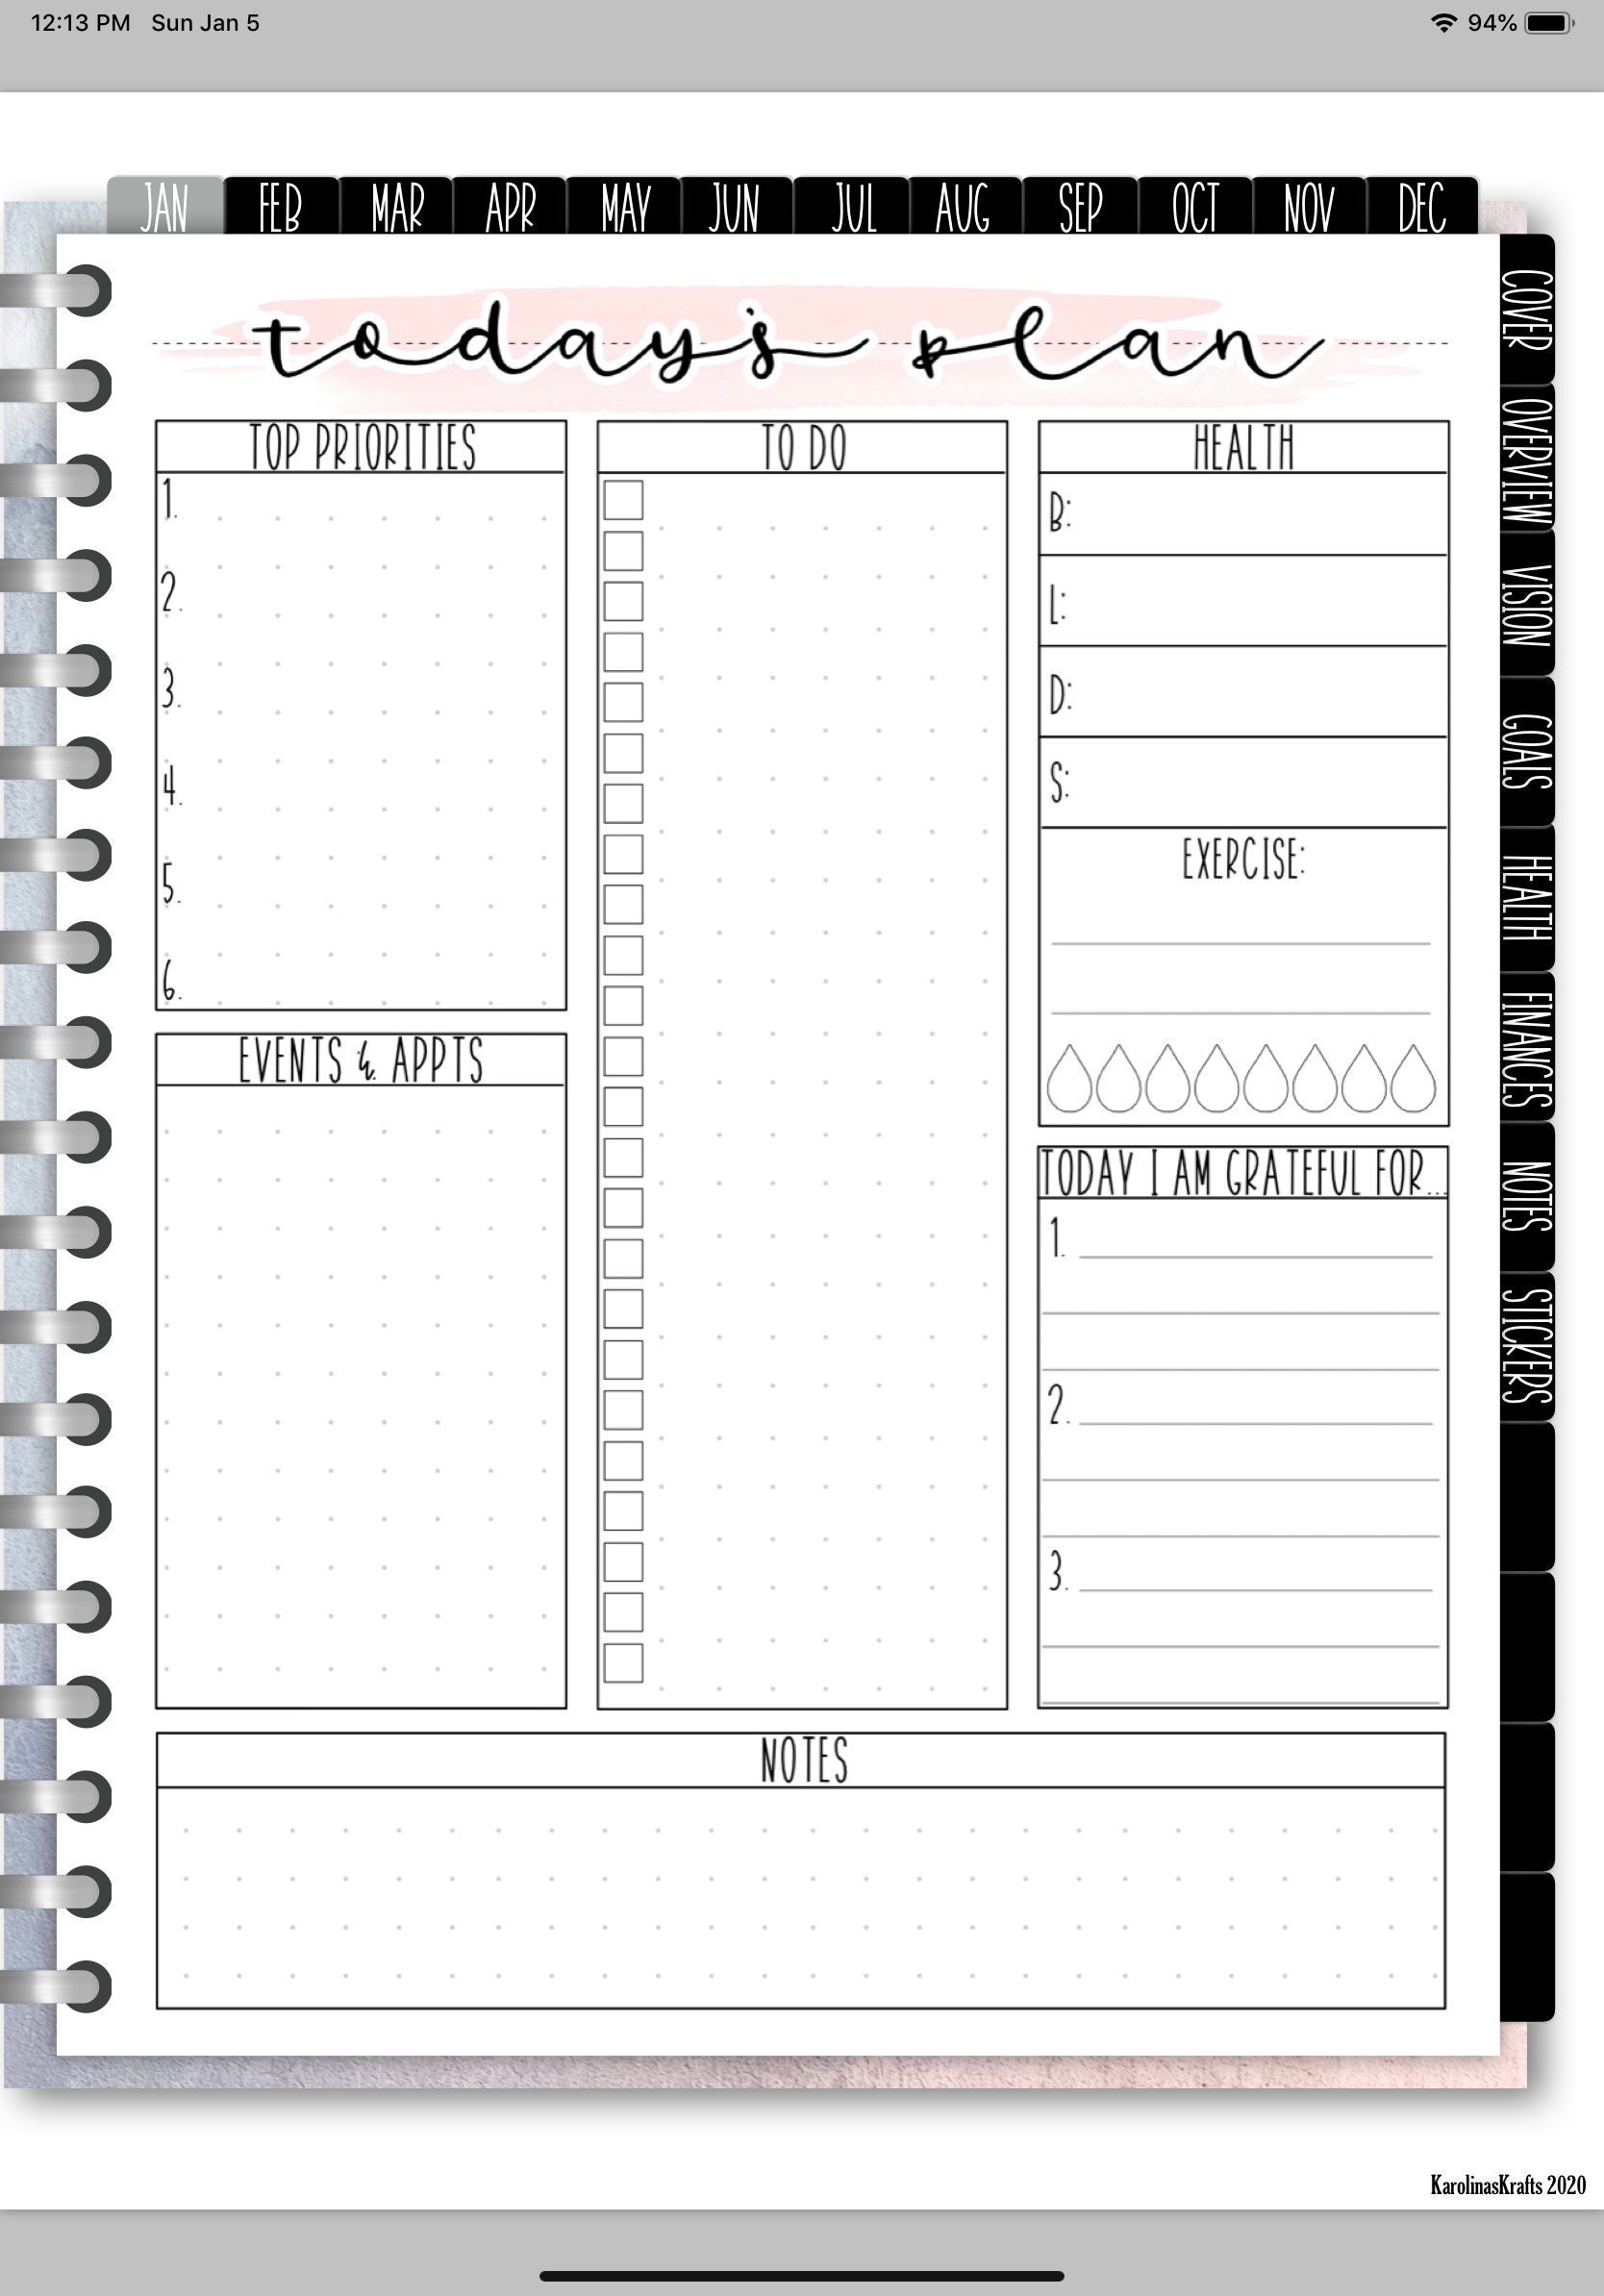 Daily Planning Insert on 1 Page Today's Plan Printable - Etsy